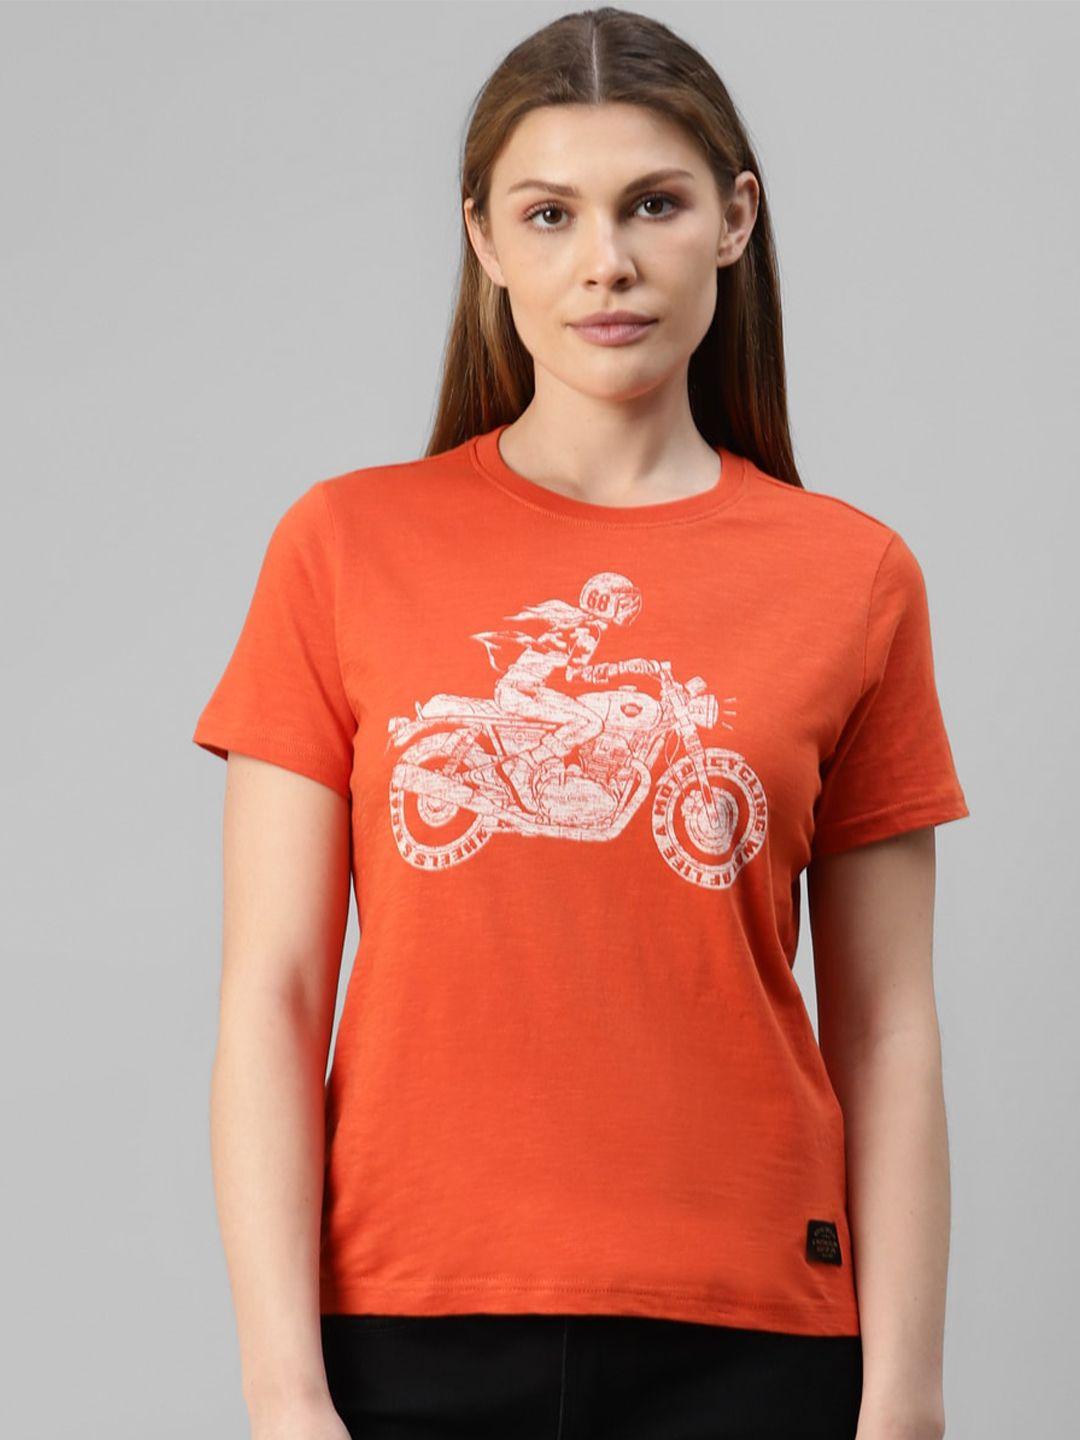 royal enfield graphic printed  round neck cotton t-shirt